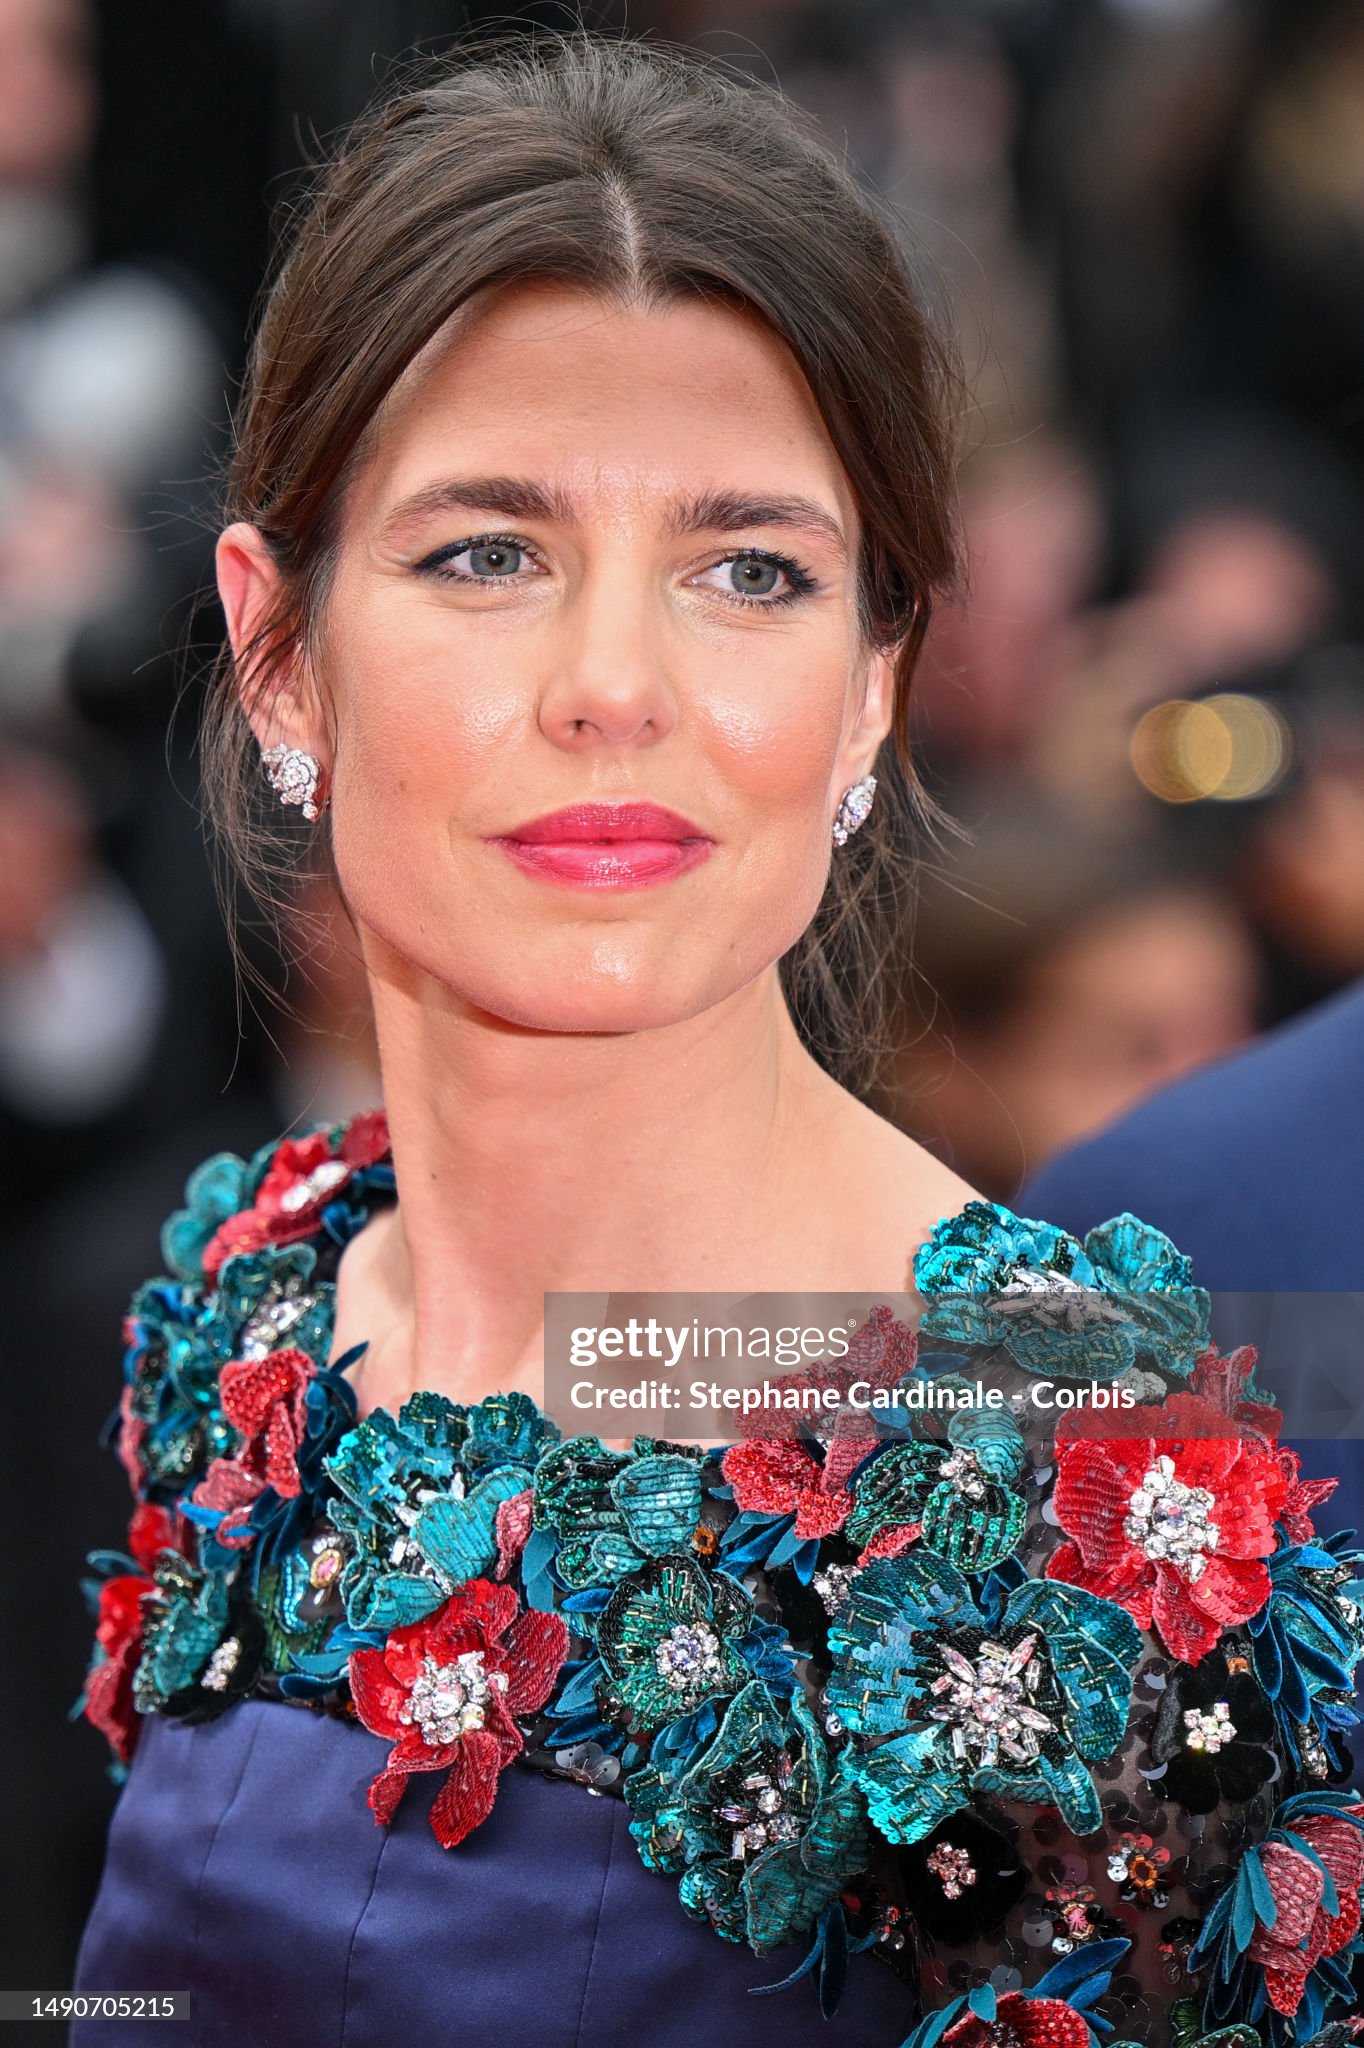 charlotte-casiraghi-attends-the-jeanne-du-barry-screening-opening-ceremony-red-carpet-at-the.jpg